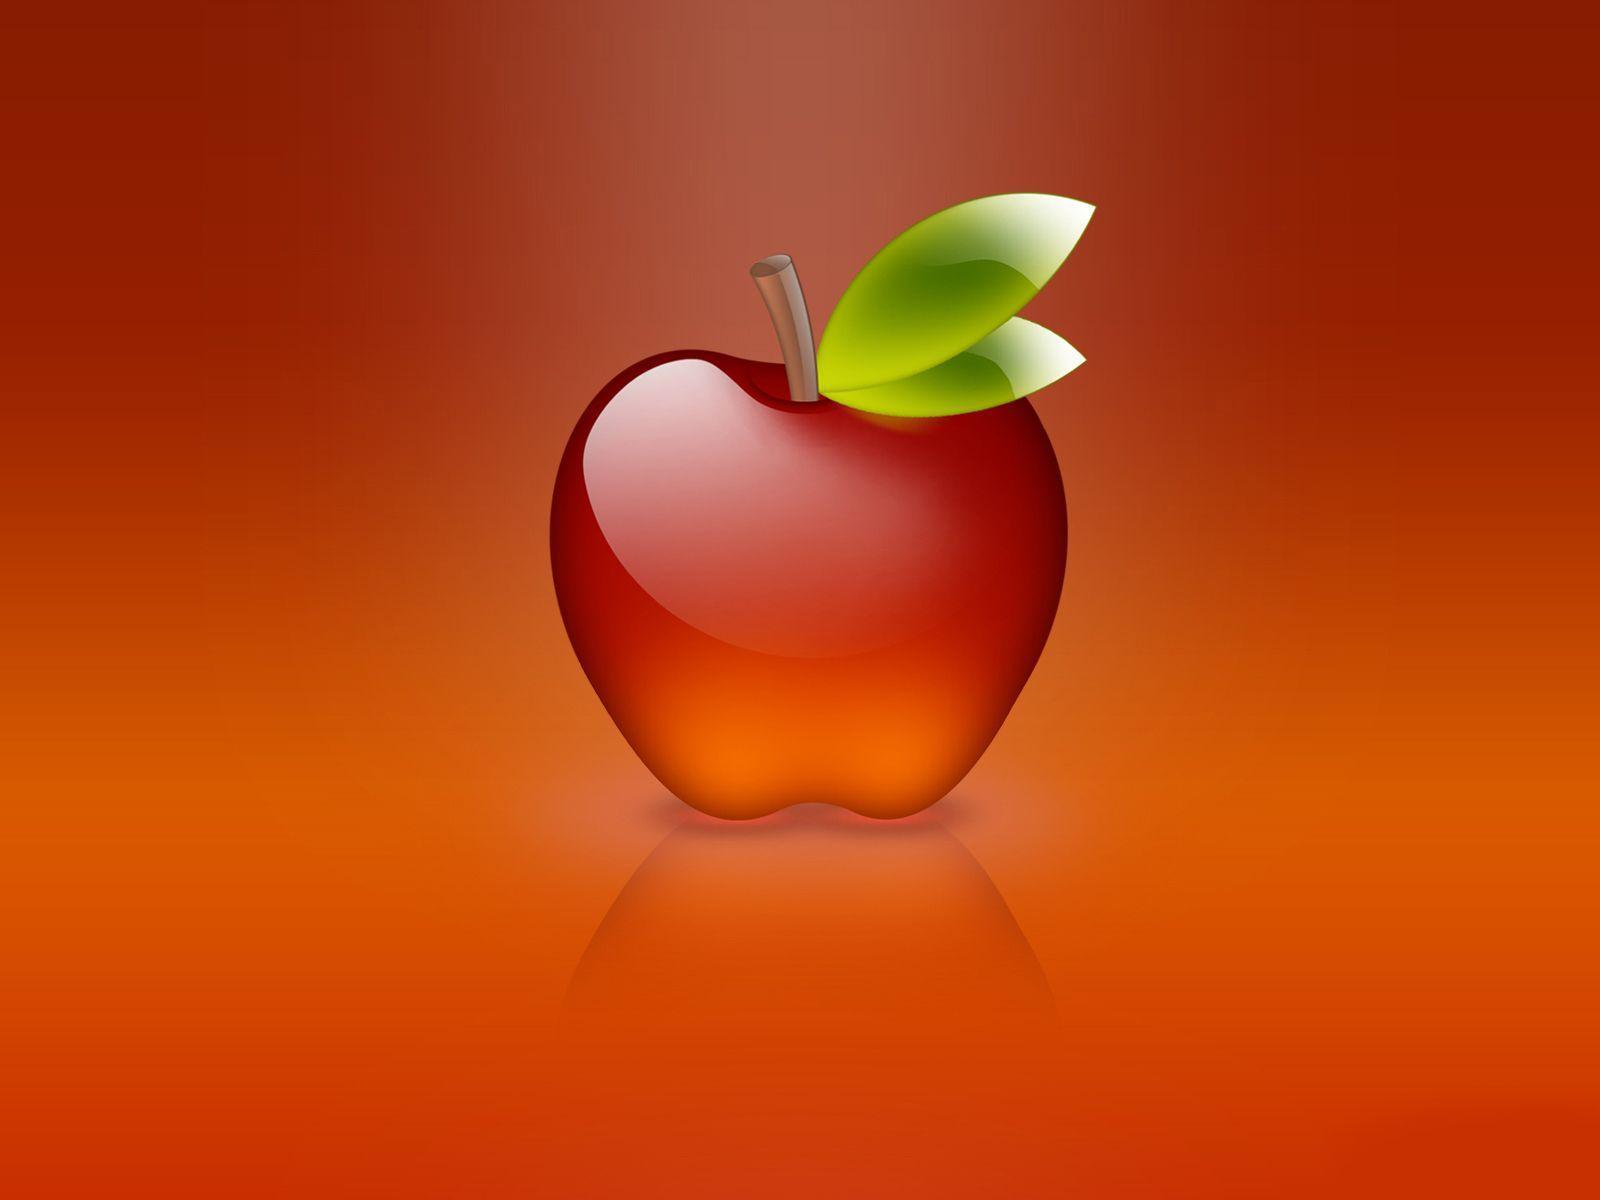 glassy colors of apple wallpaper Search Engine